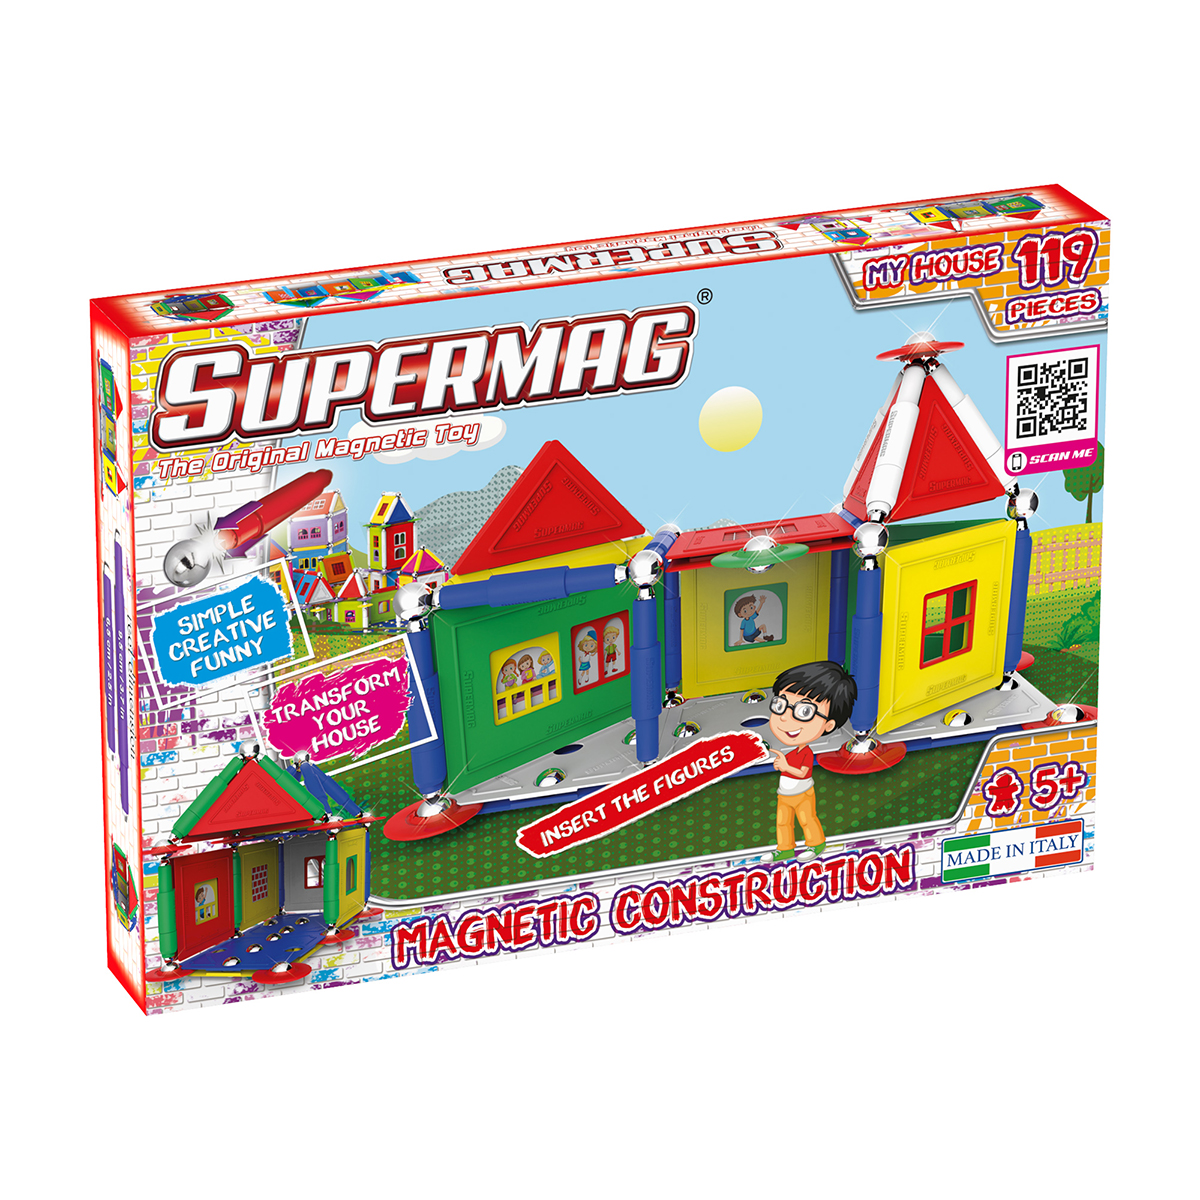 Set constructie, Supermag, My Houses, 119 piese, Multicolor 119